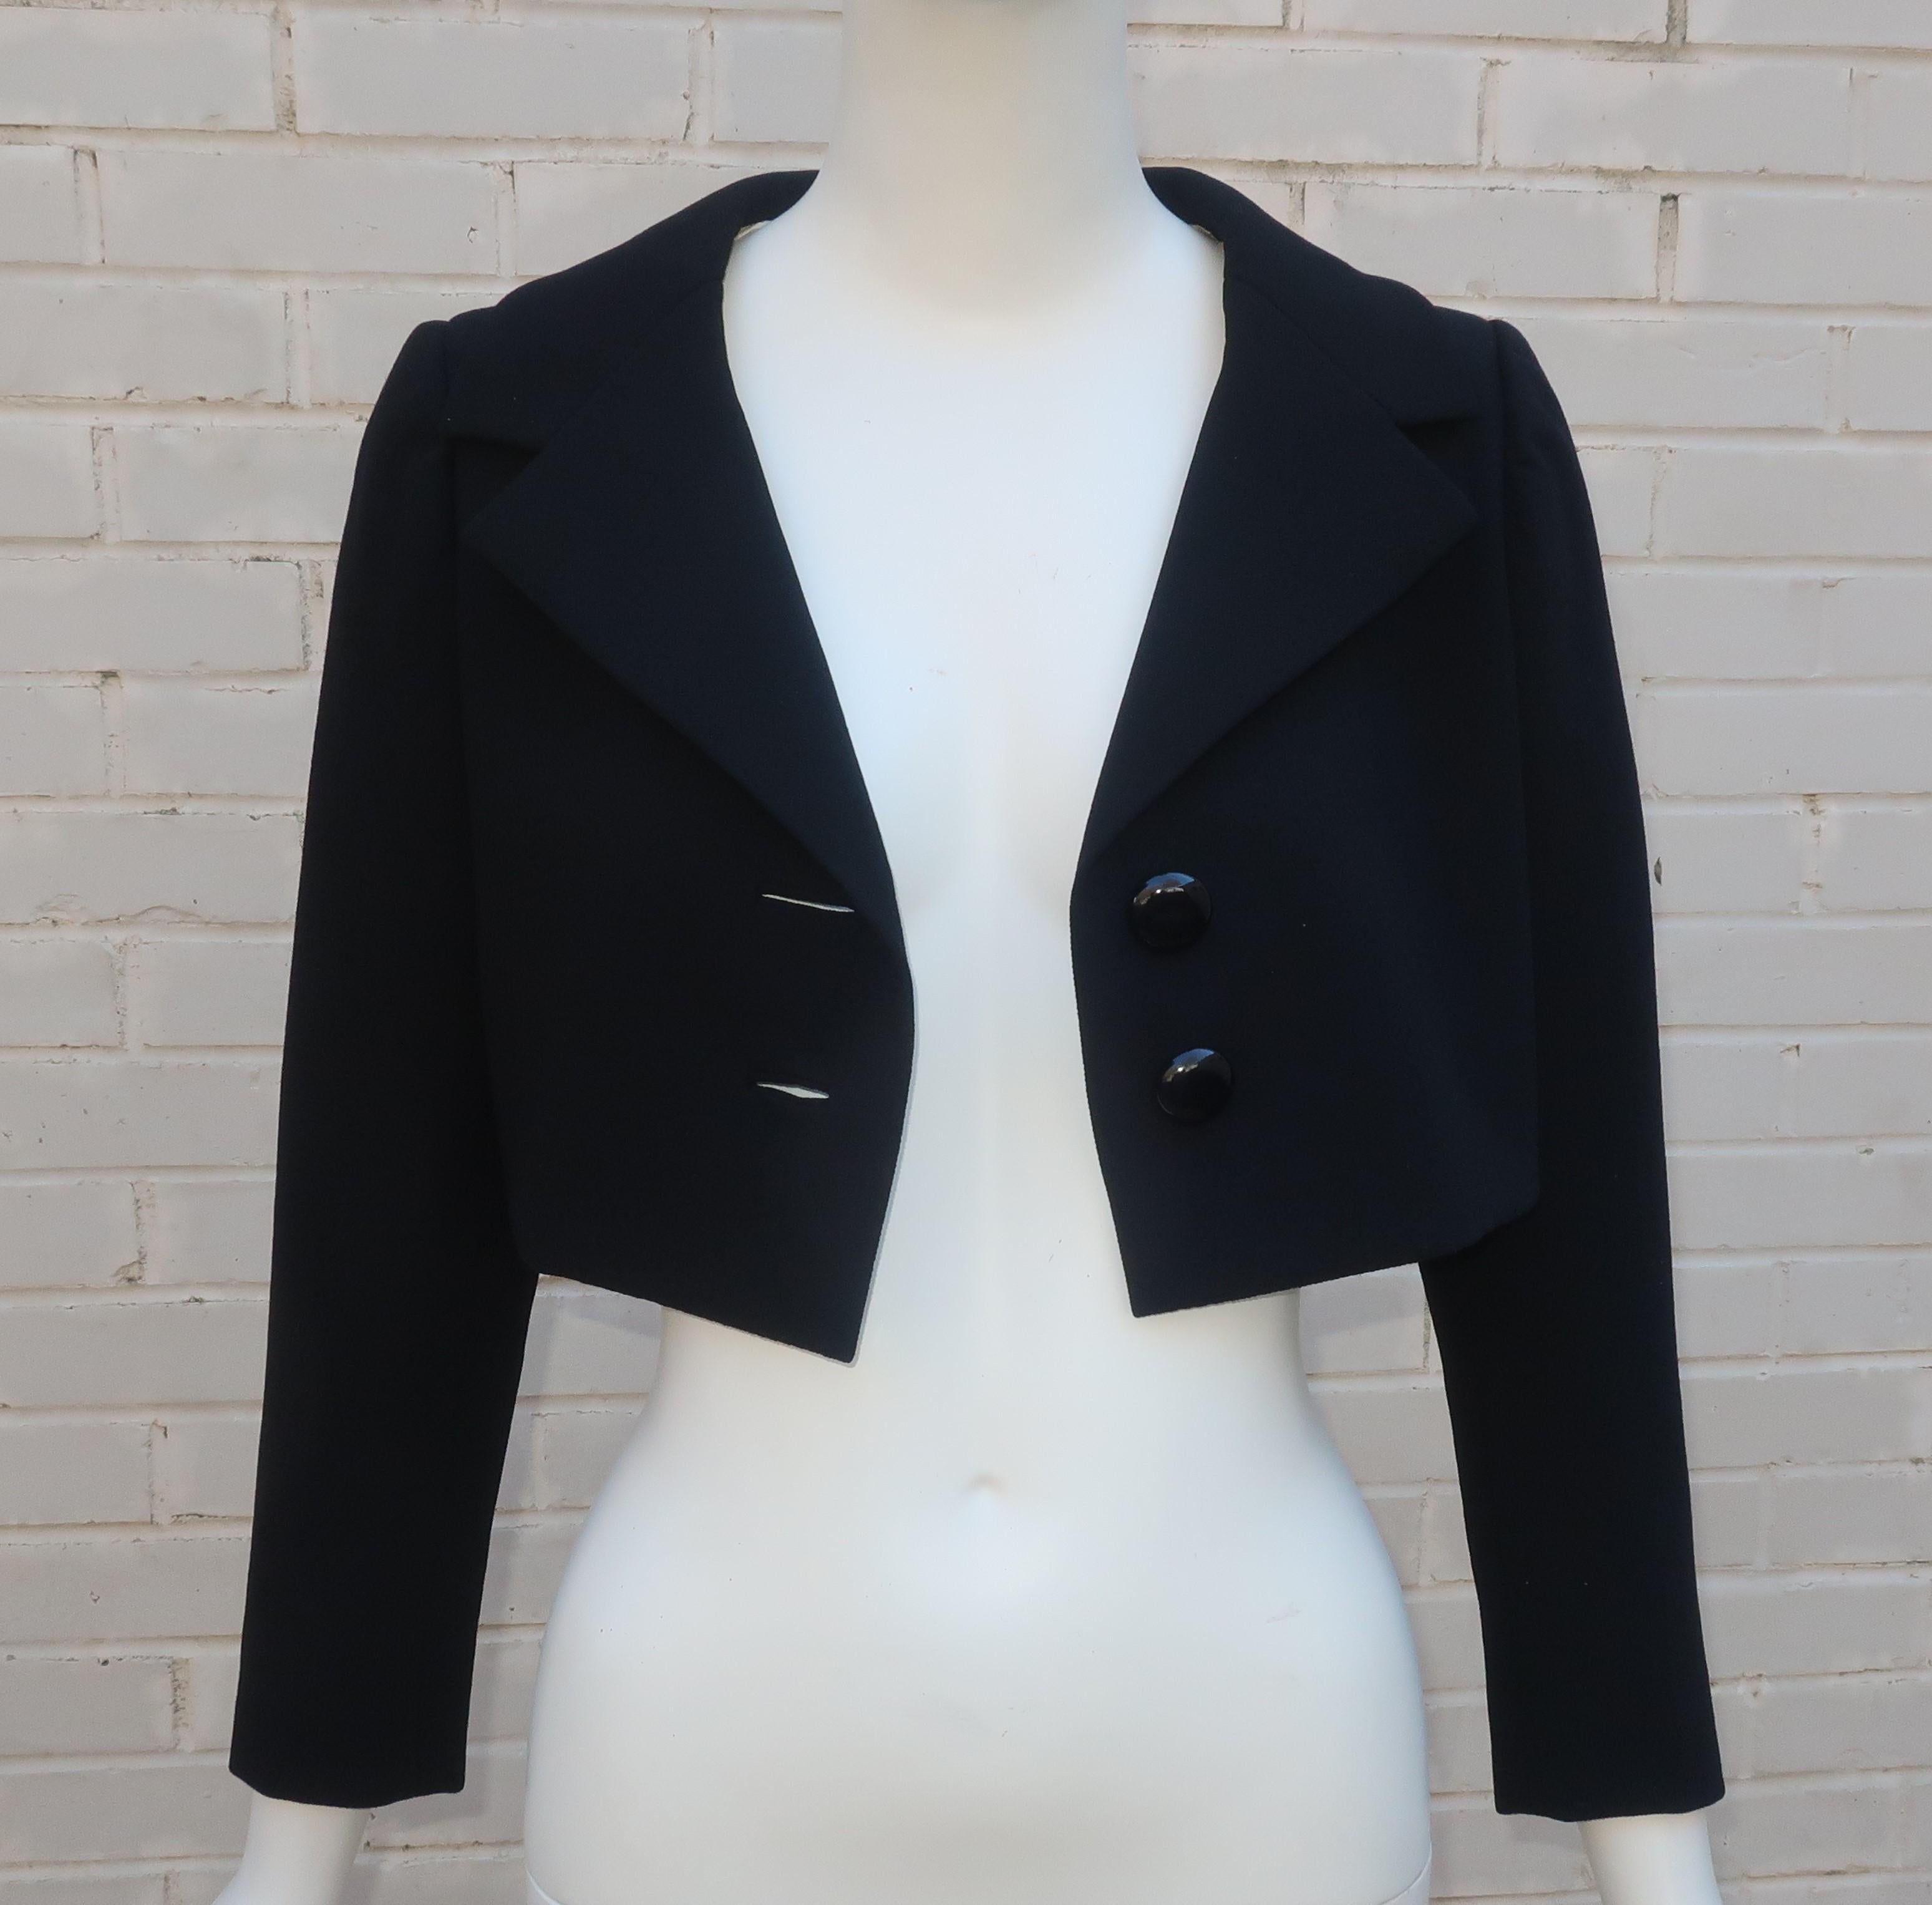 Norman Norell Belted Maxi Skirt Evening Suit With Cropped Jacket, 1968 For Sale 6